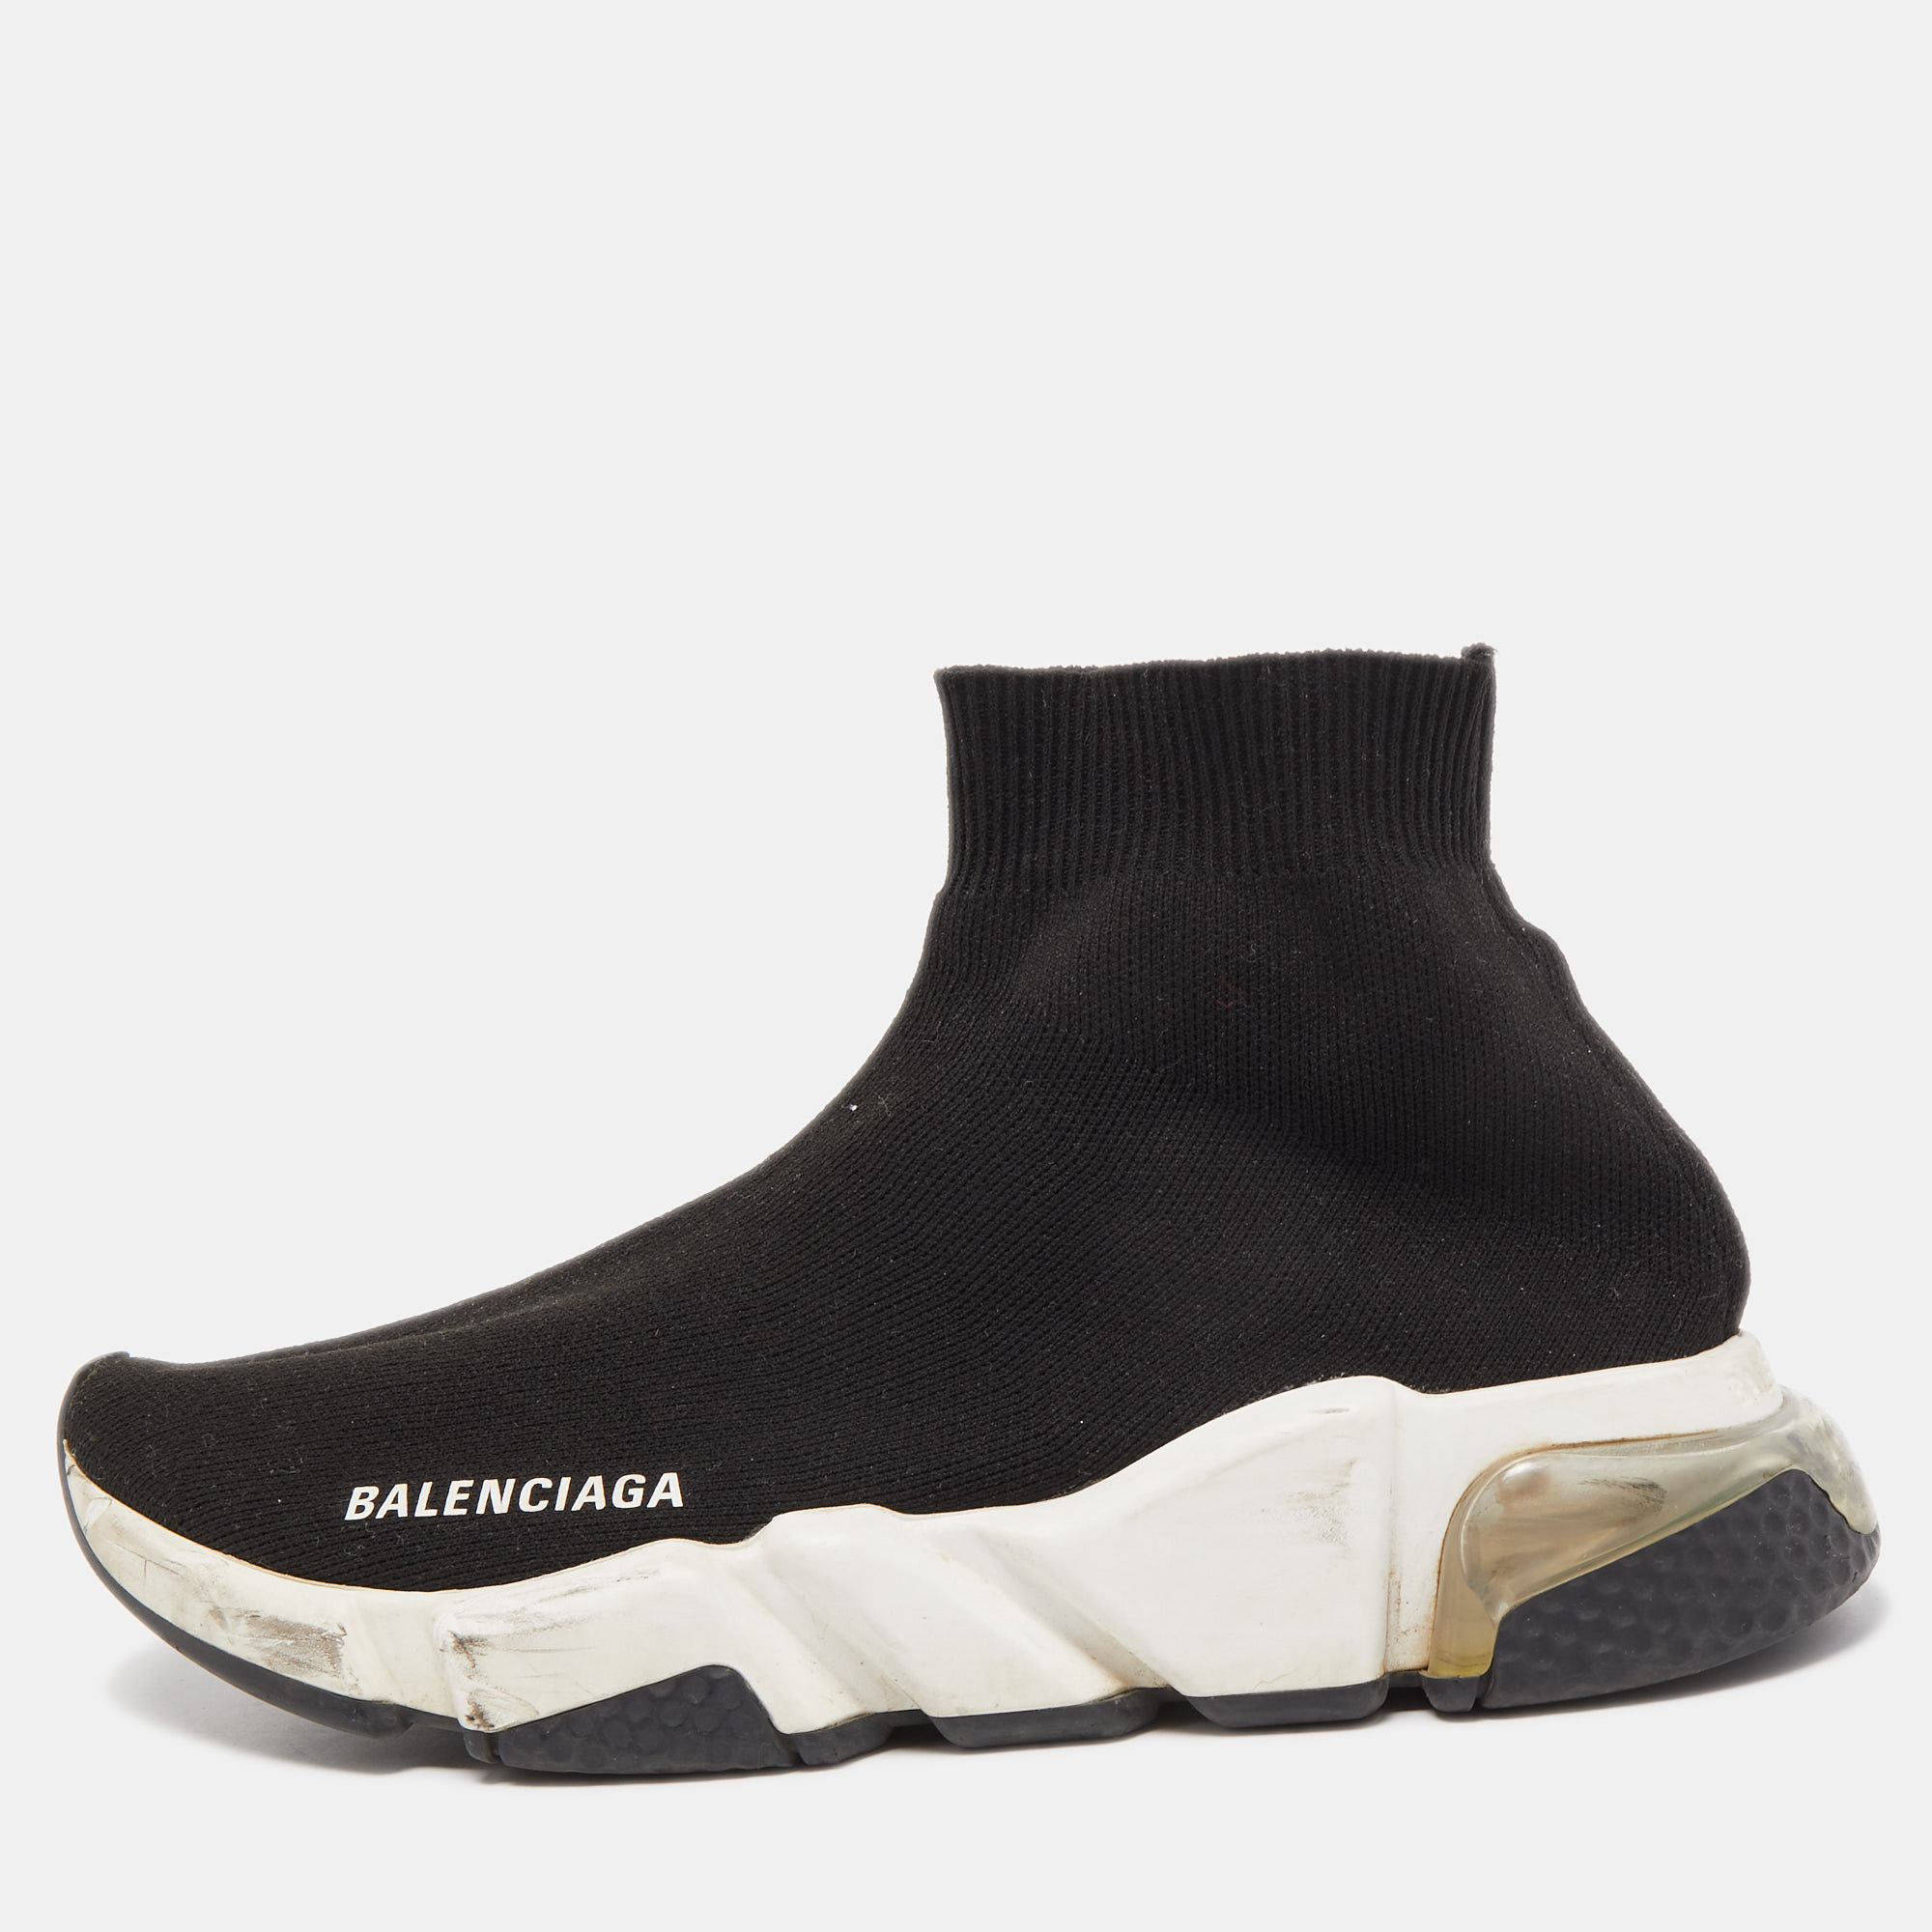 Balenciaga black knit fabric speed trainer slip on sneakers size 37